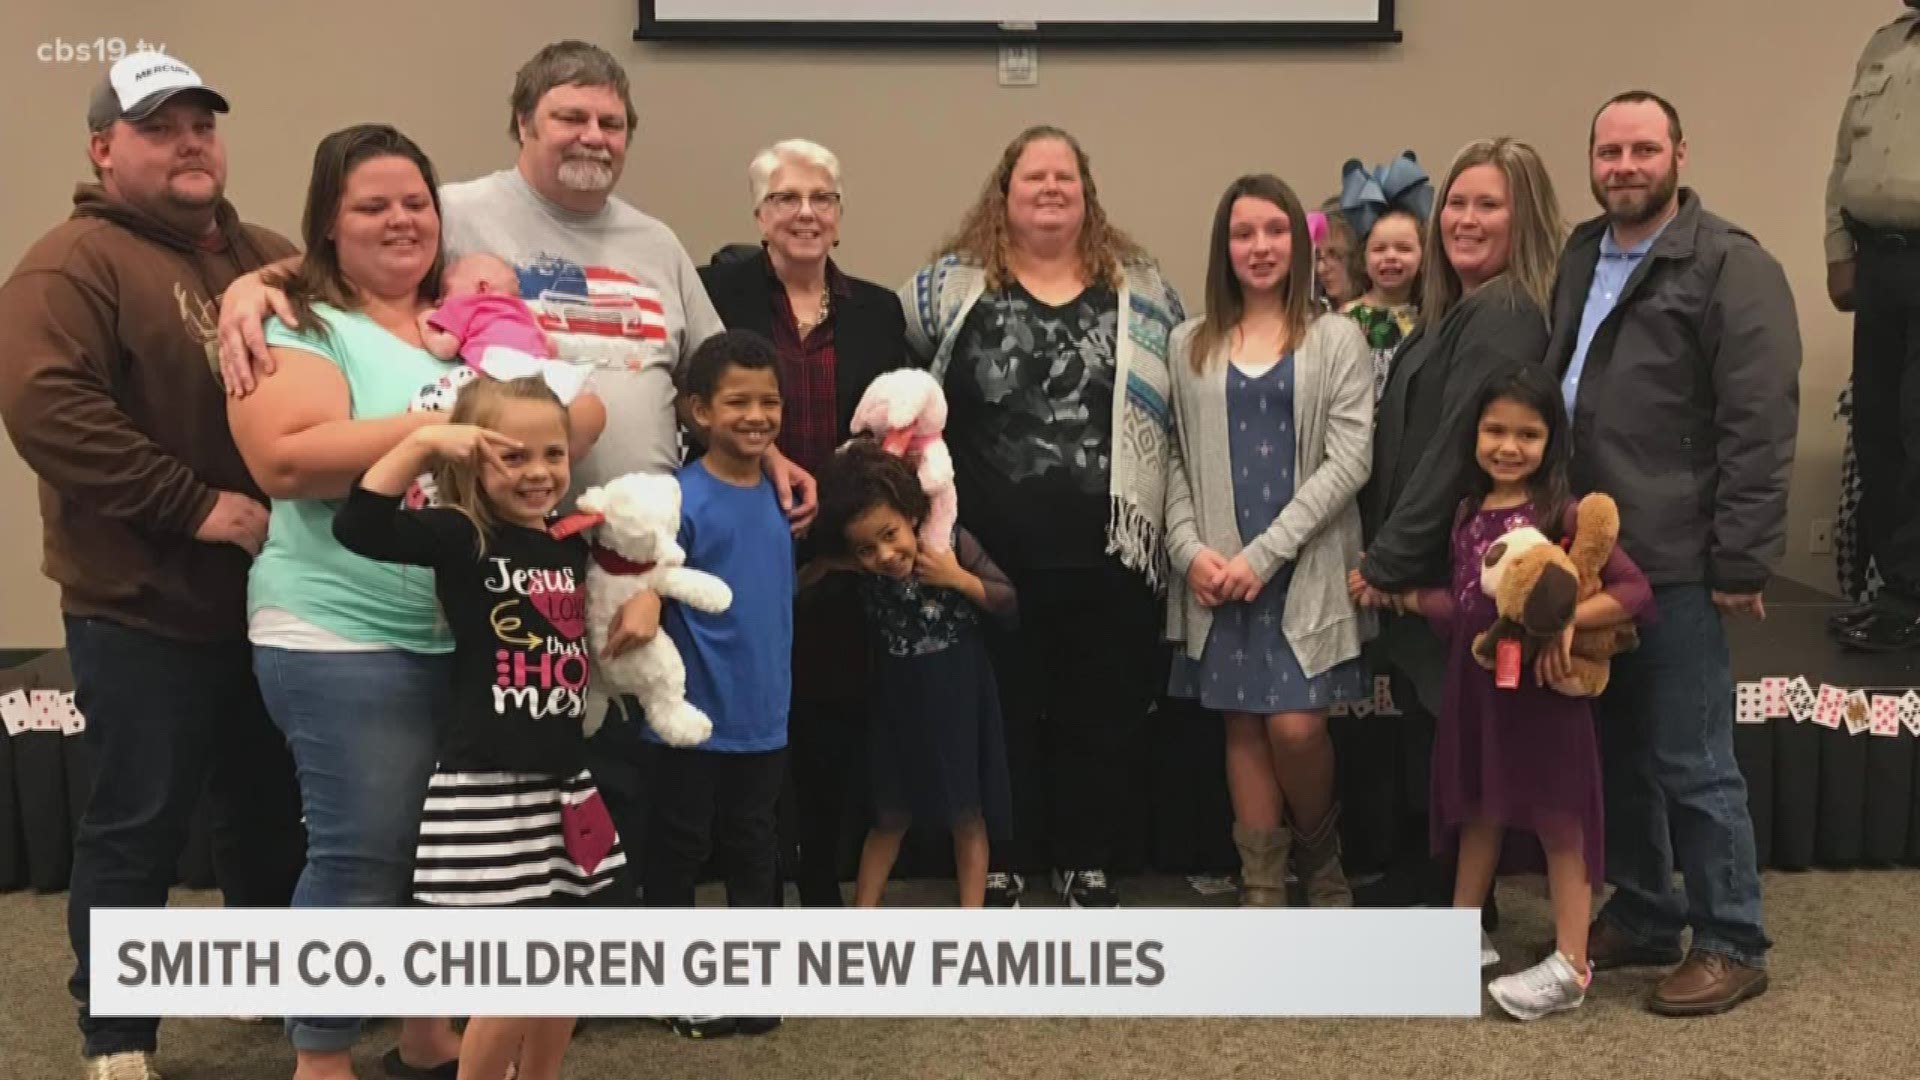 CPS partnered with organizations across East Texas for National Smith County Adoption Day at Green Acres Baptist Church on Fri. Nov. 16.